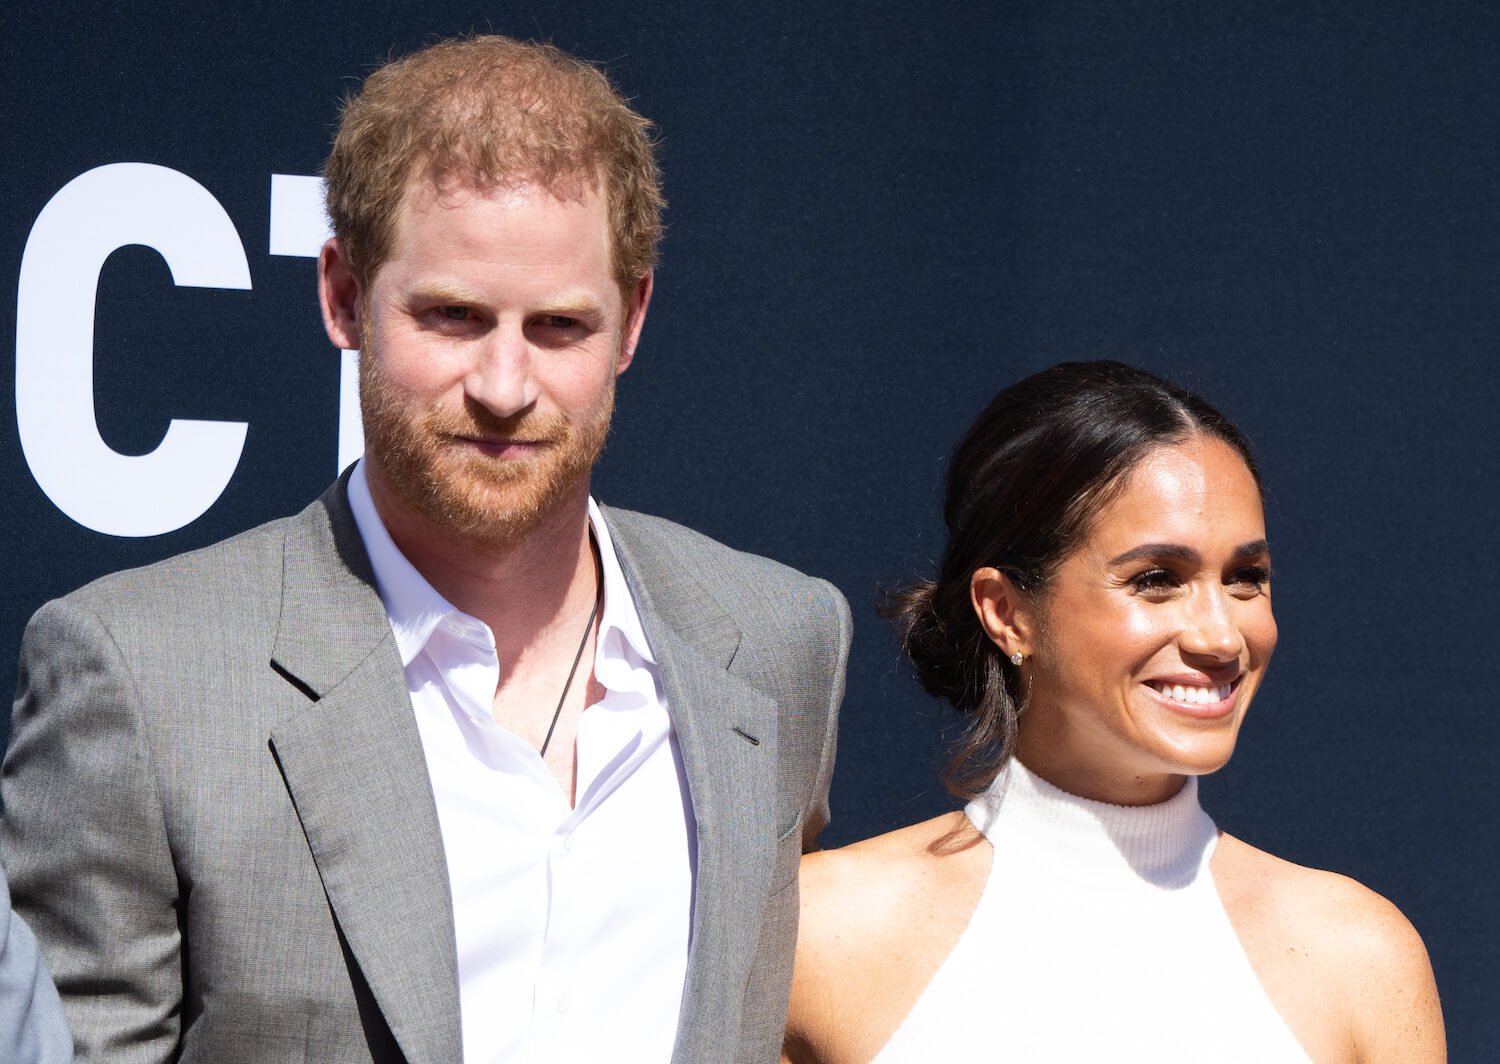 Meghan Markle’s Former Friend Claims Prince Harry and Meghan Are Struggling With Being ‘Far Down’ the Hollywood ‘Pecking Order’